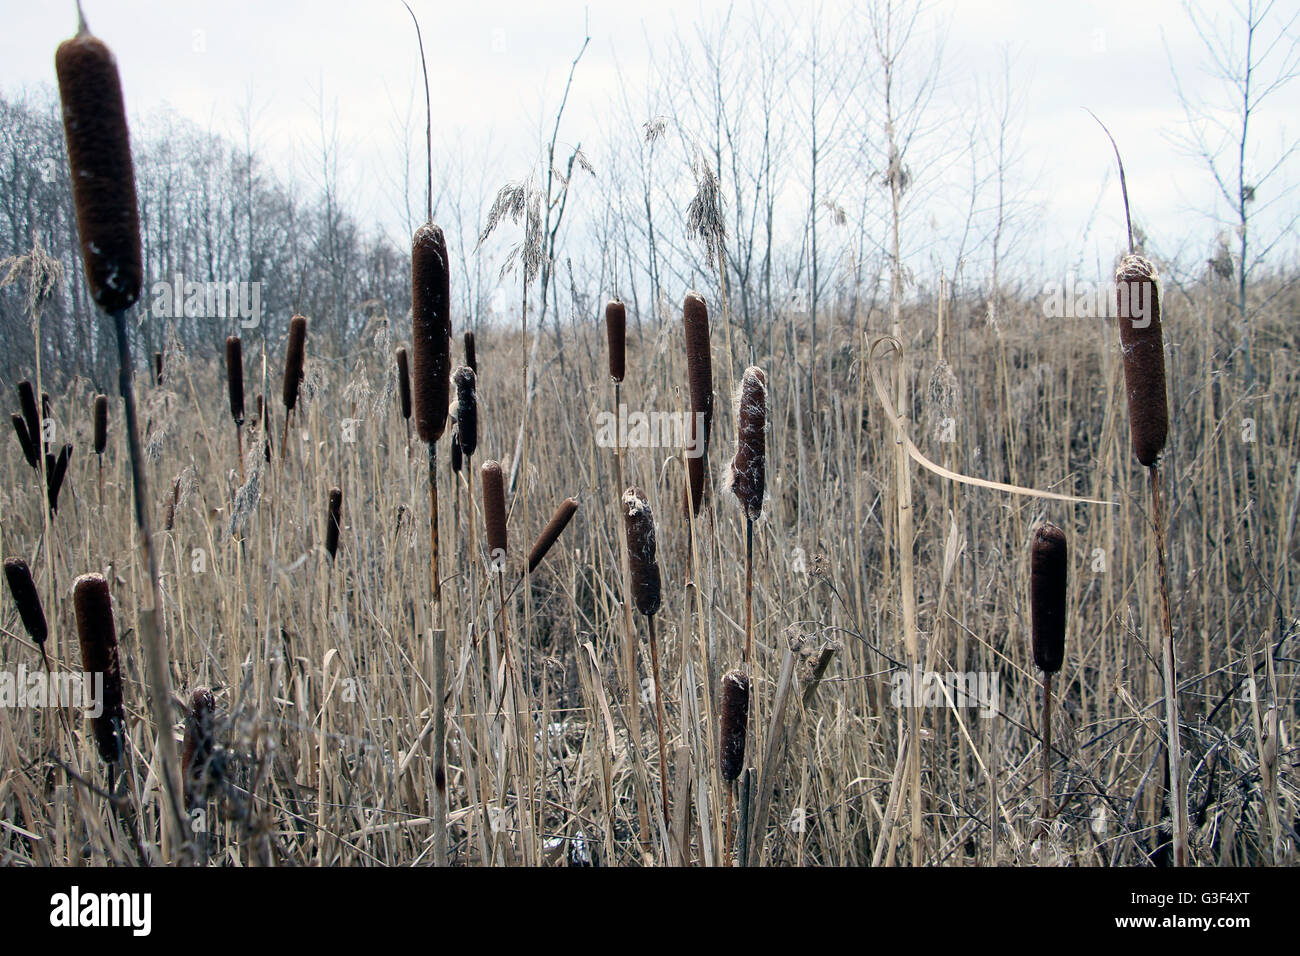 Cattail cattails typha bulrush bulrushes reed reeds totoras marsh swamp Stock Photo